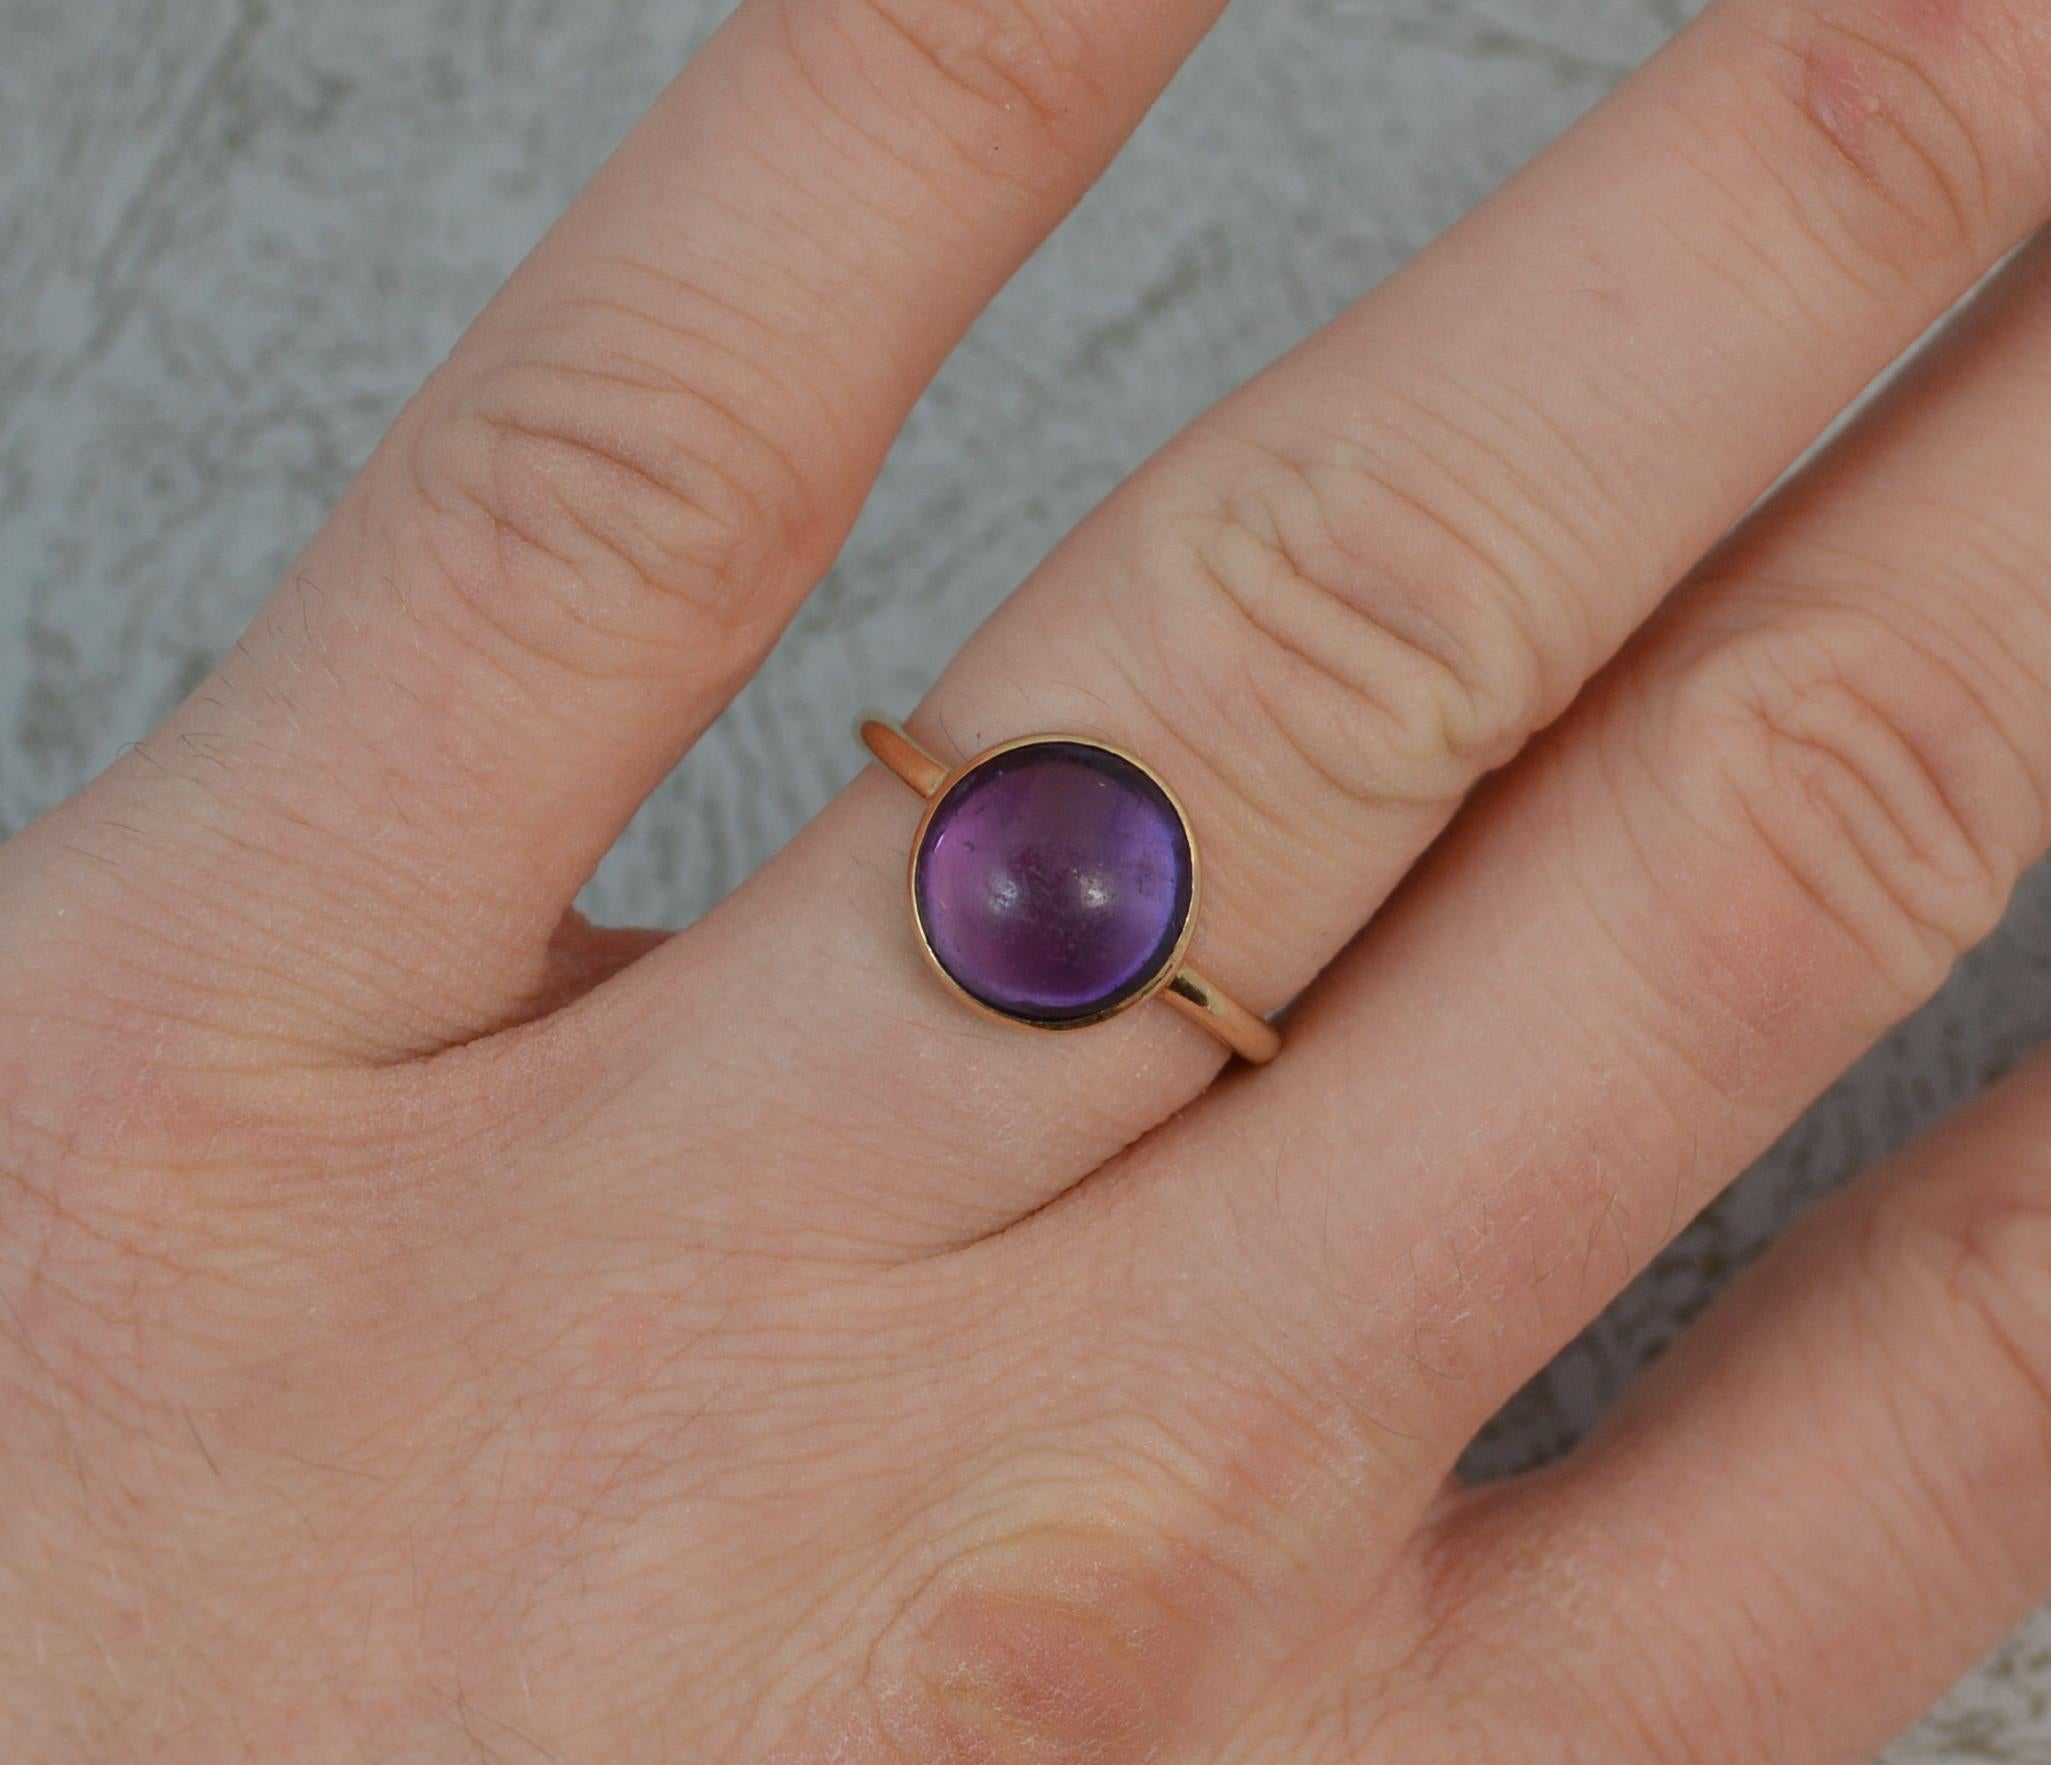 A Victorian solitaire cluster ring in 9 carat gold. Designed with a single round amethyst cabochon stone in bezel setting. Plain gold shank.
10mm diameter stone. 2.9 grams.
Size M 1/2 UK, 6 1/2 US. Tests as 9ct.
Good overall condition for age. Clean